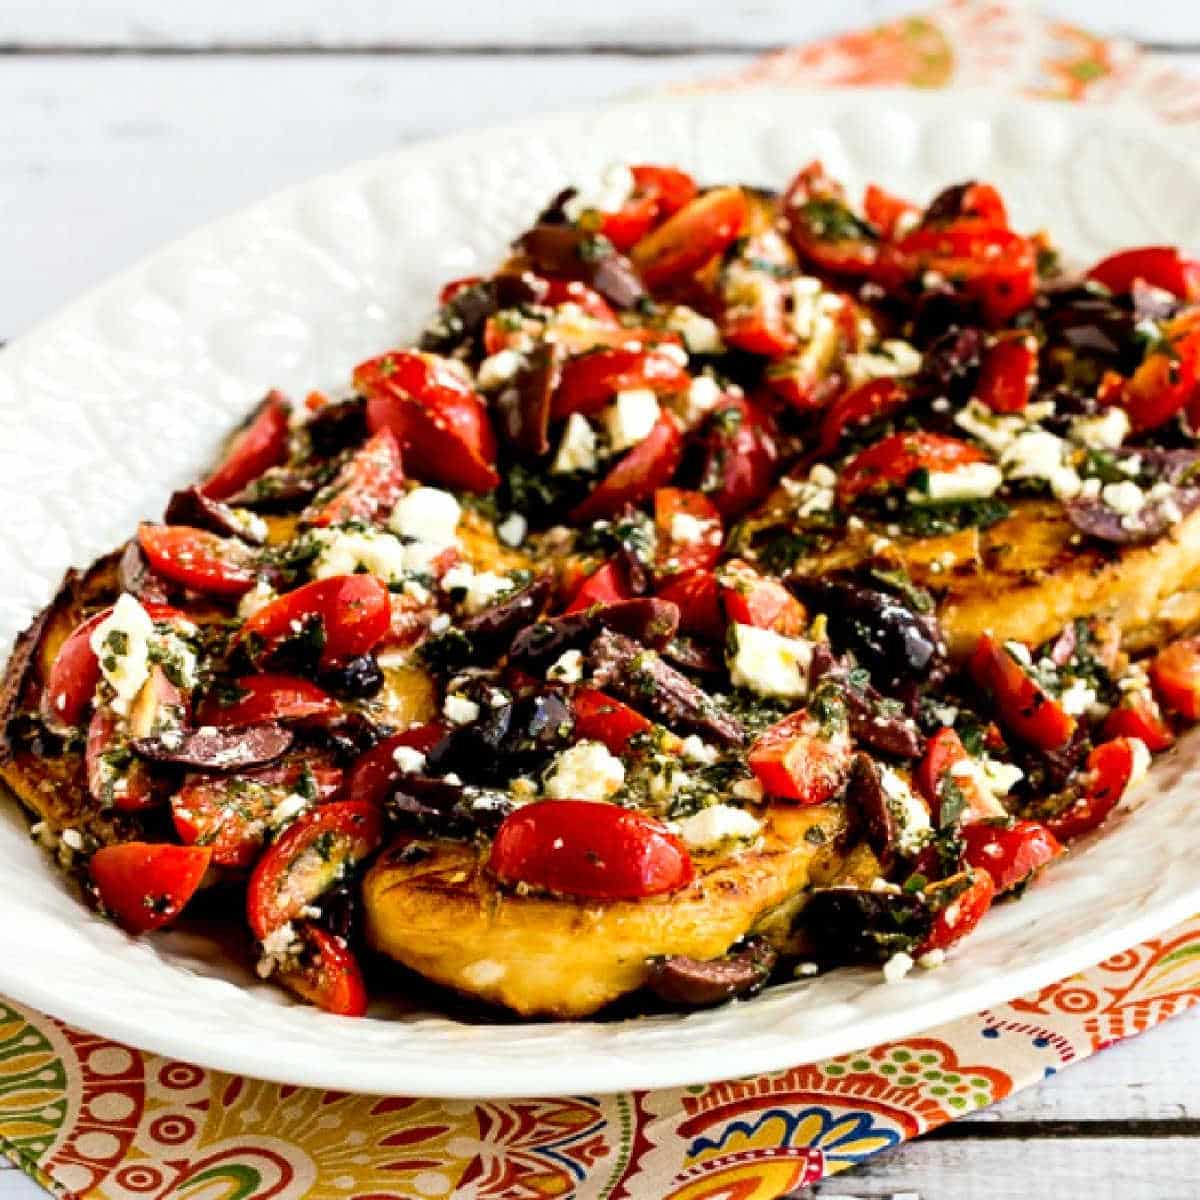 Greek chicken topped with tomatoes, olives and feta cheese